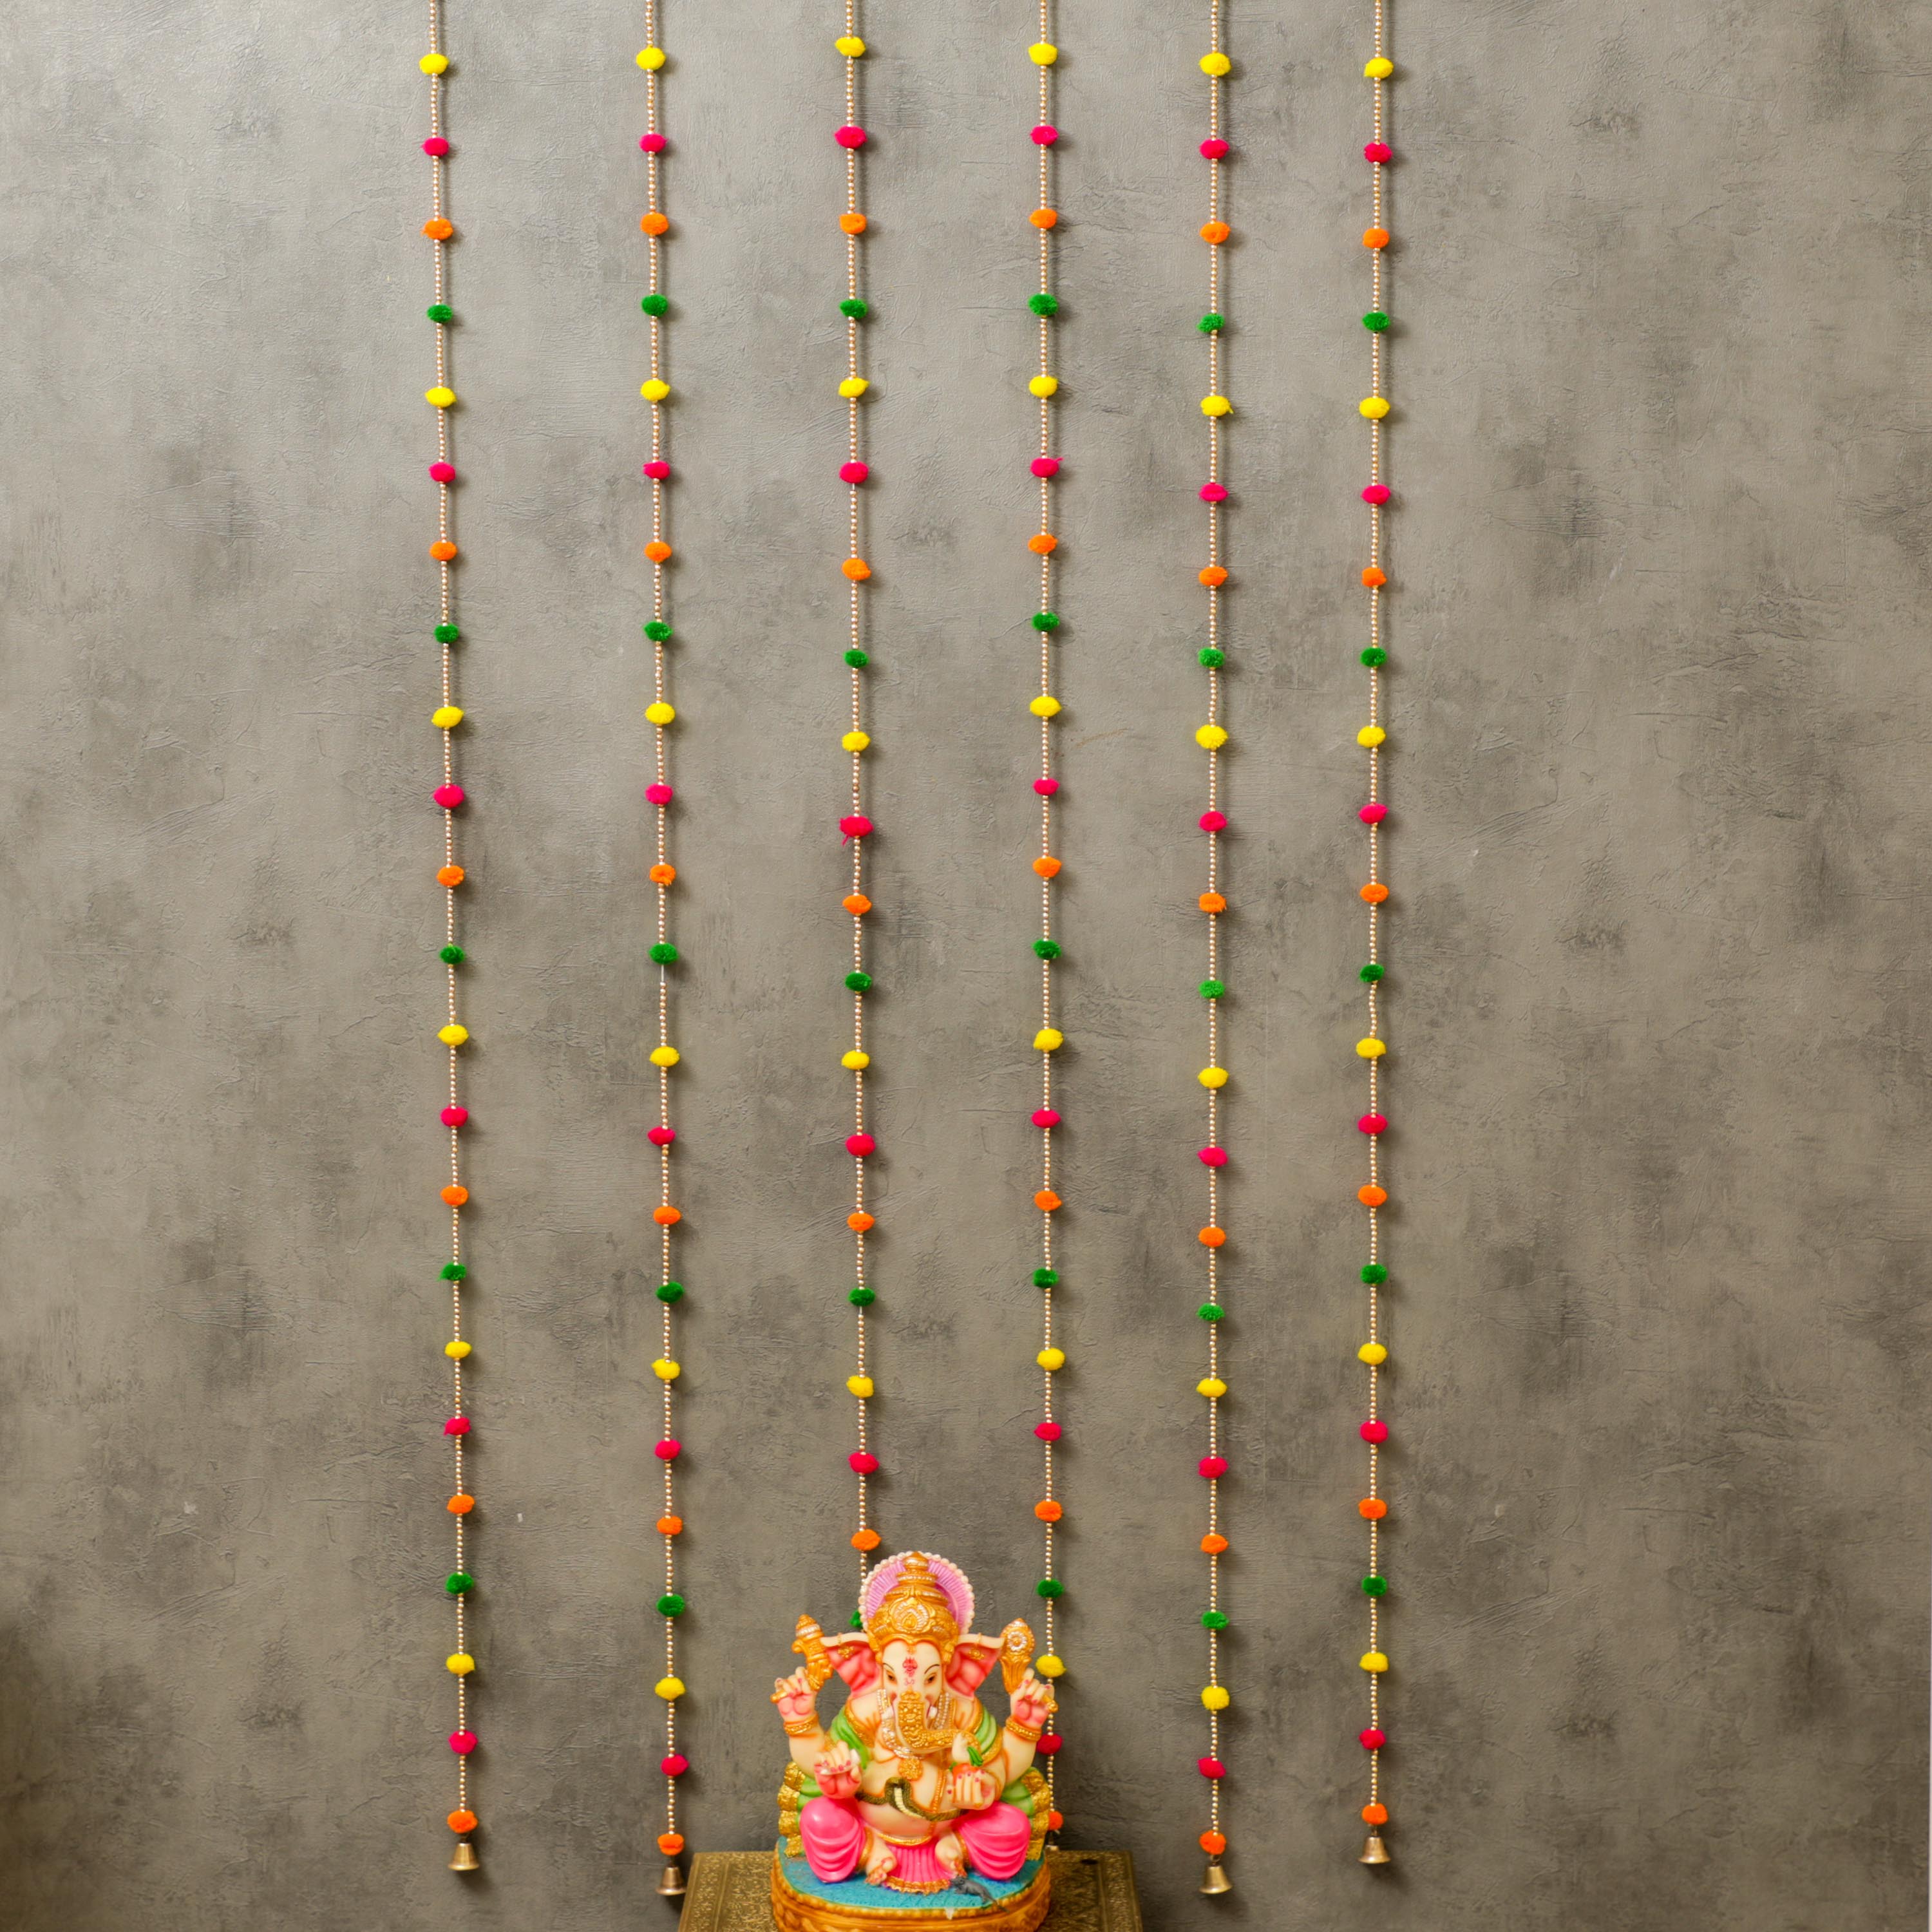 The garland is strung together with a thin thread and small bell attached to the end